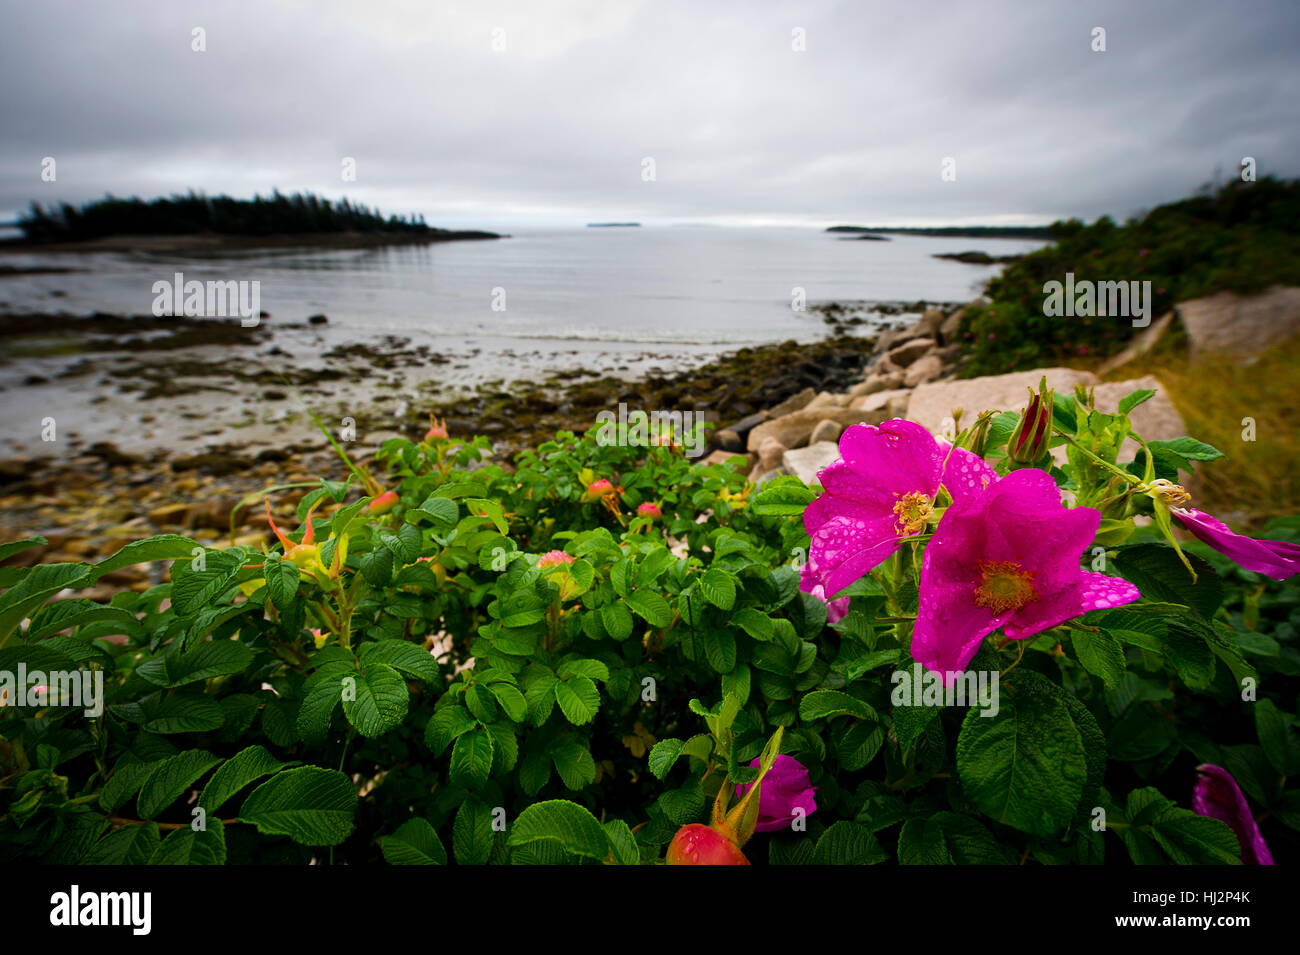 Bright Pink Flowers grow along a rocky rugged coastline. Stock Photo